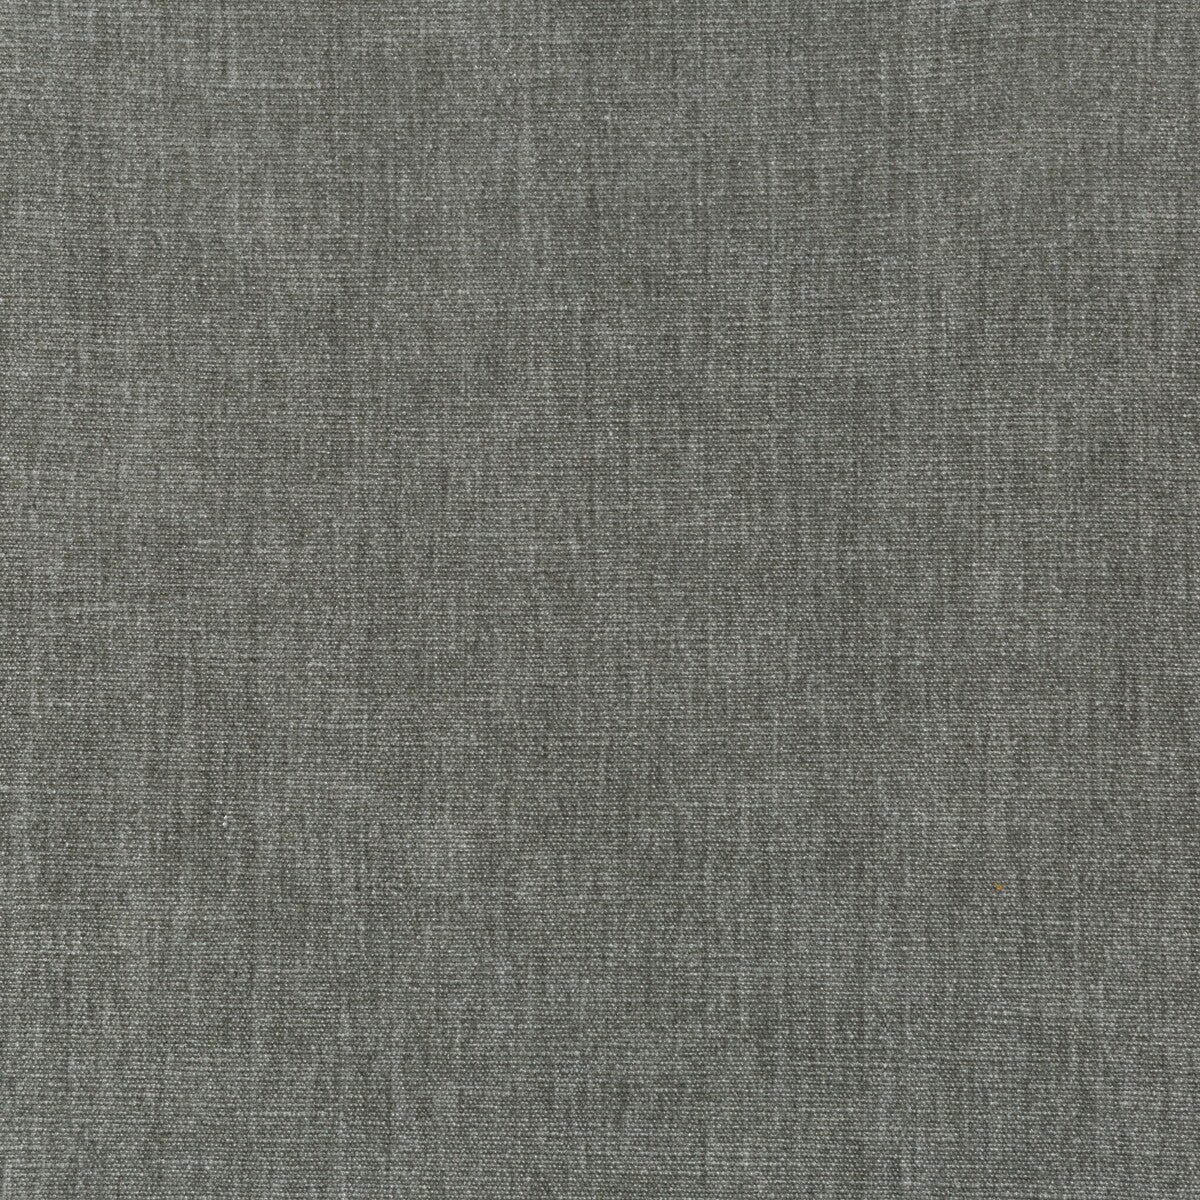 Kravet Smart fabric in 36076-21 color - pattern 36076.21.0 - by Kravet Smart in the Sumptuous Chenille II collection